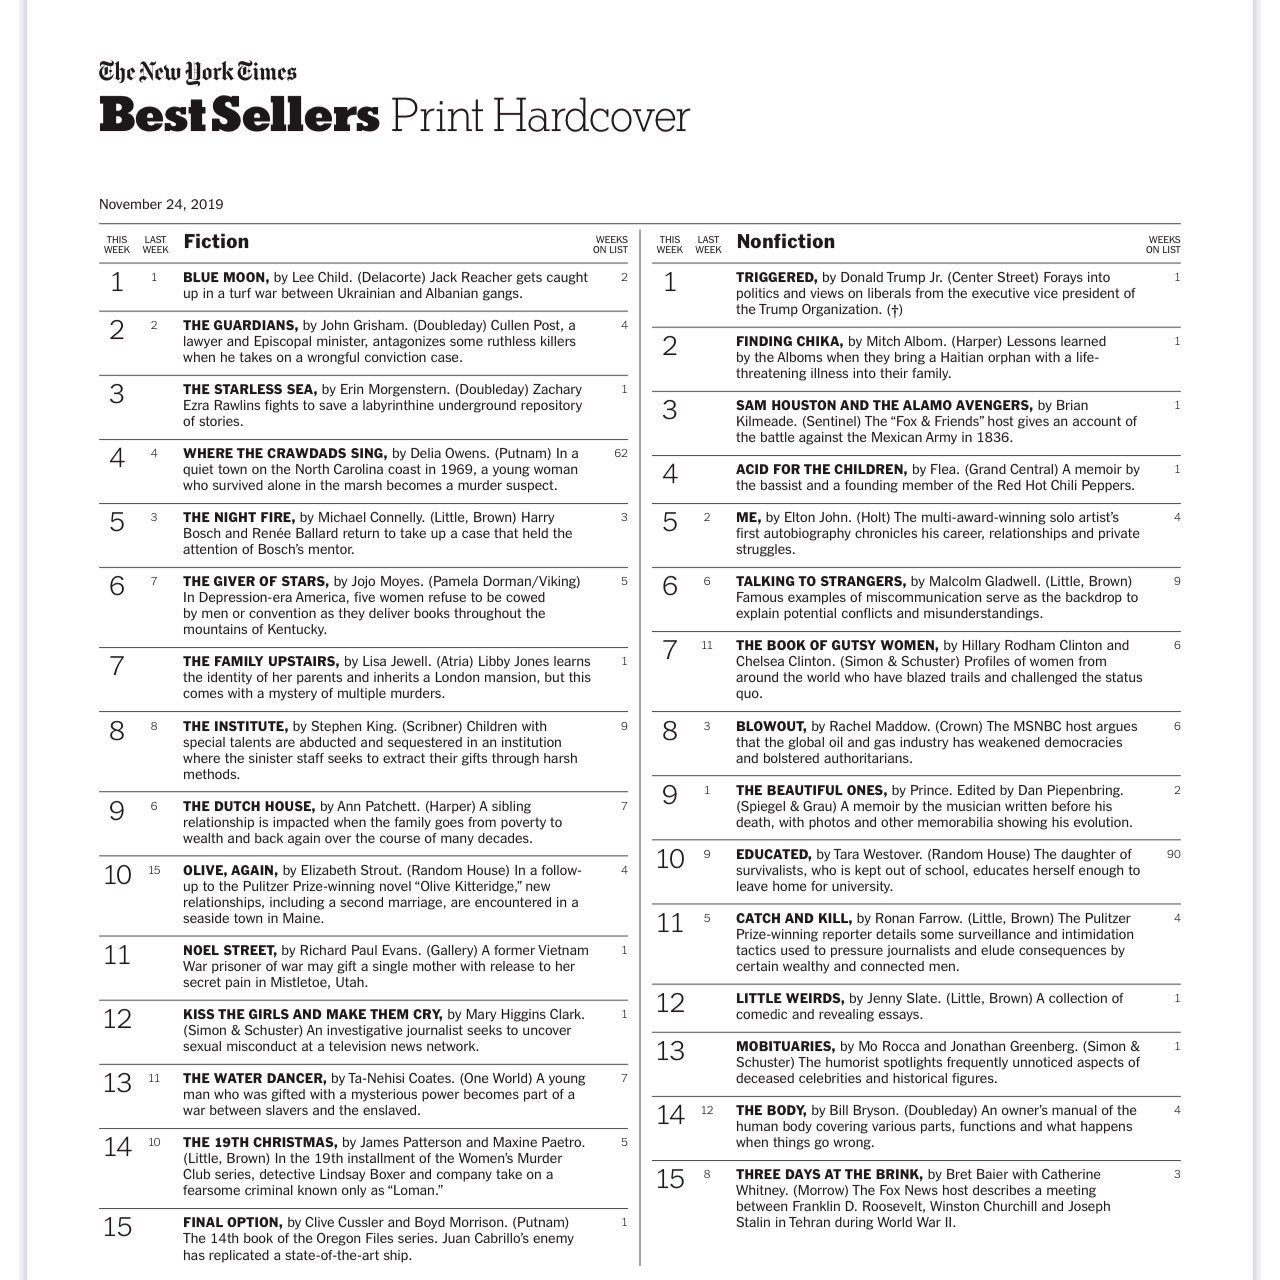 Yashar Ali 🐘 یاشار on Twitter "New York Times bestseller list is out